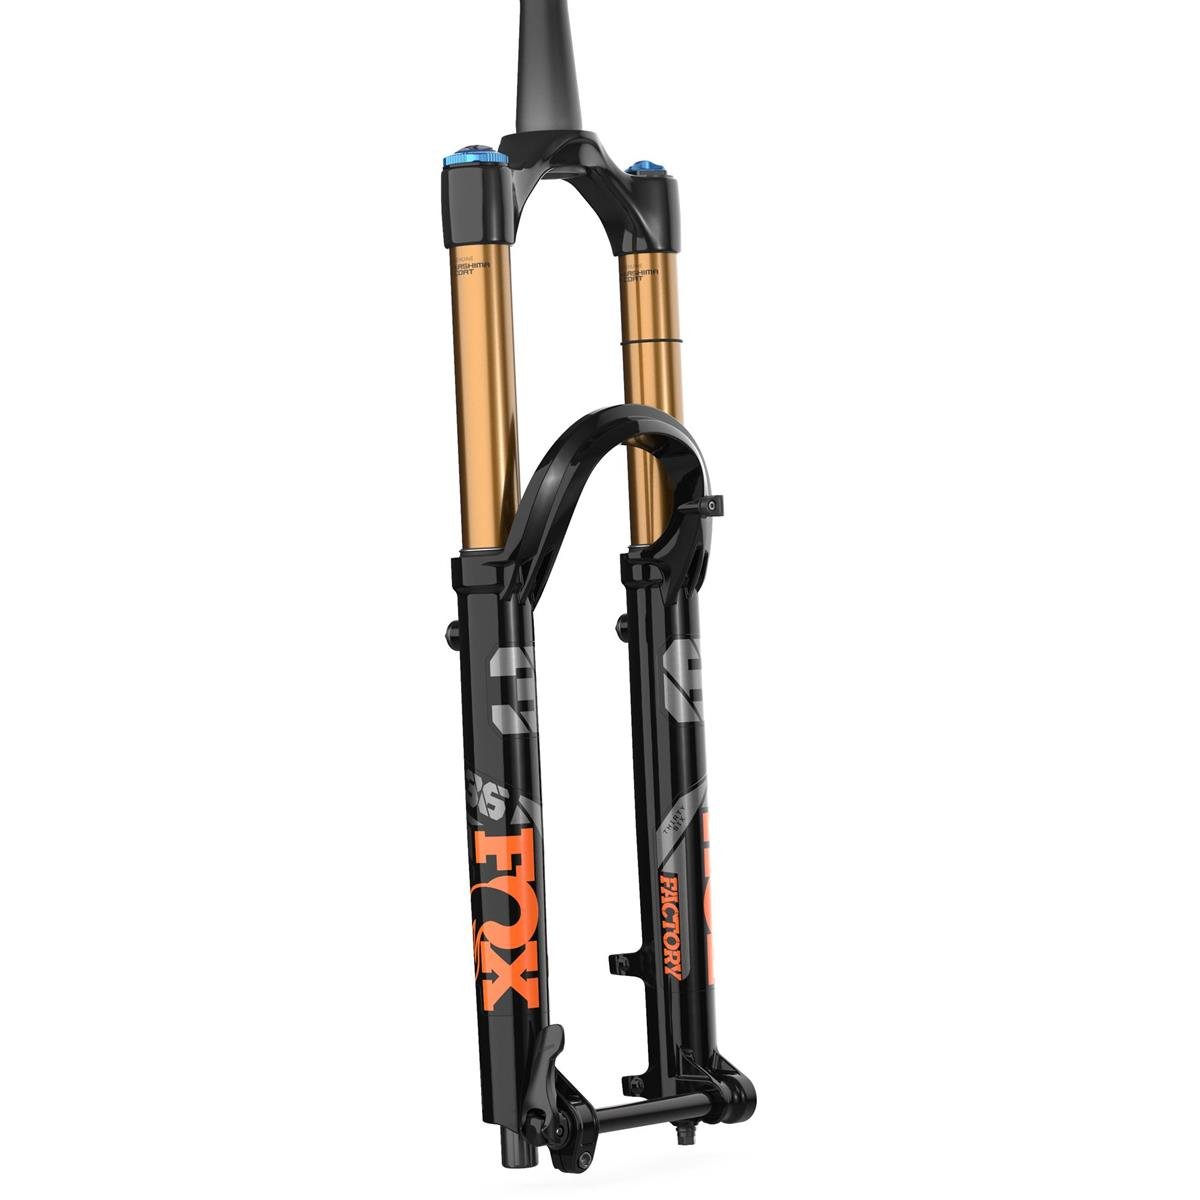 Fox Racing Shox Suspension Fork 36 Float Factory Kashima 27.5 Inches, 15x110 mm, GRIP 2, 44 mm Offset, 160 mm